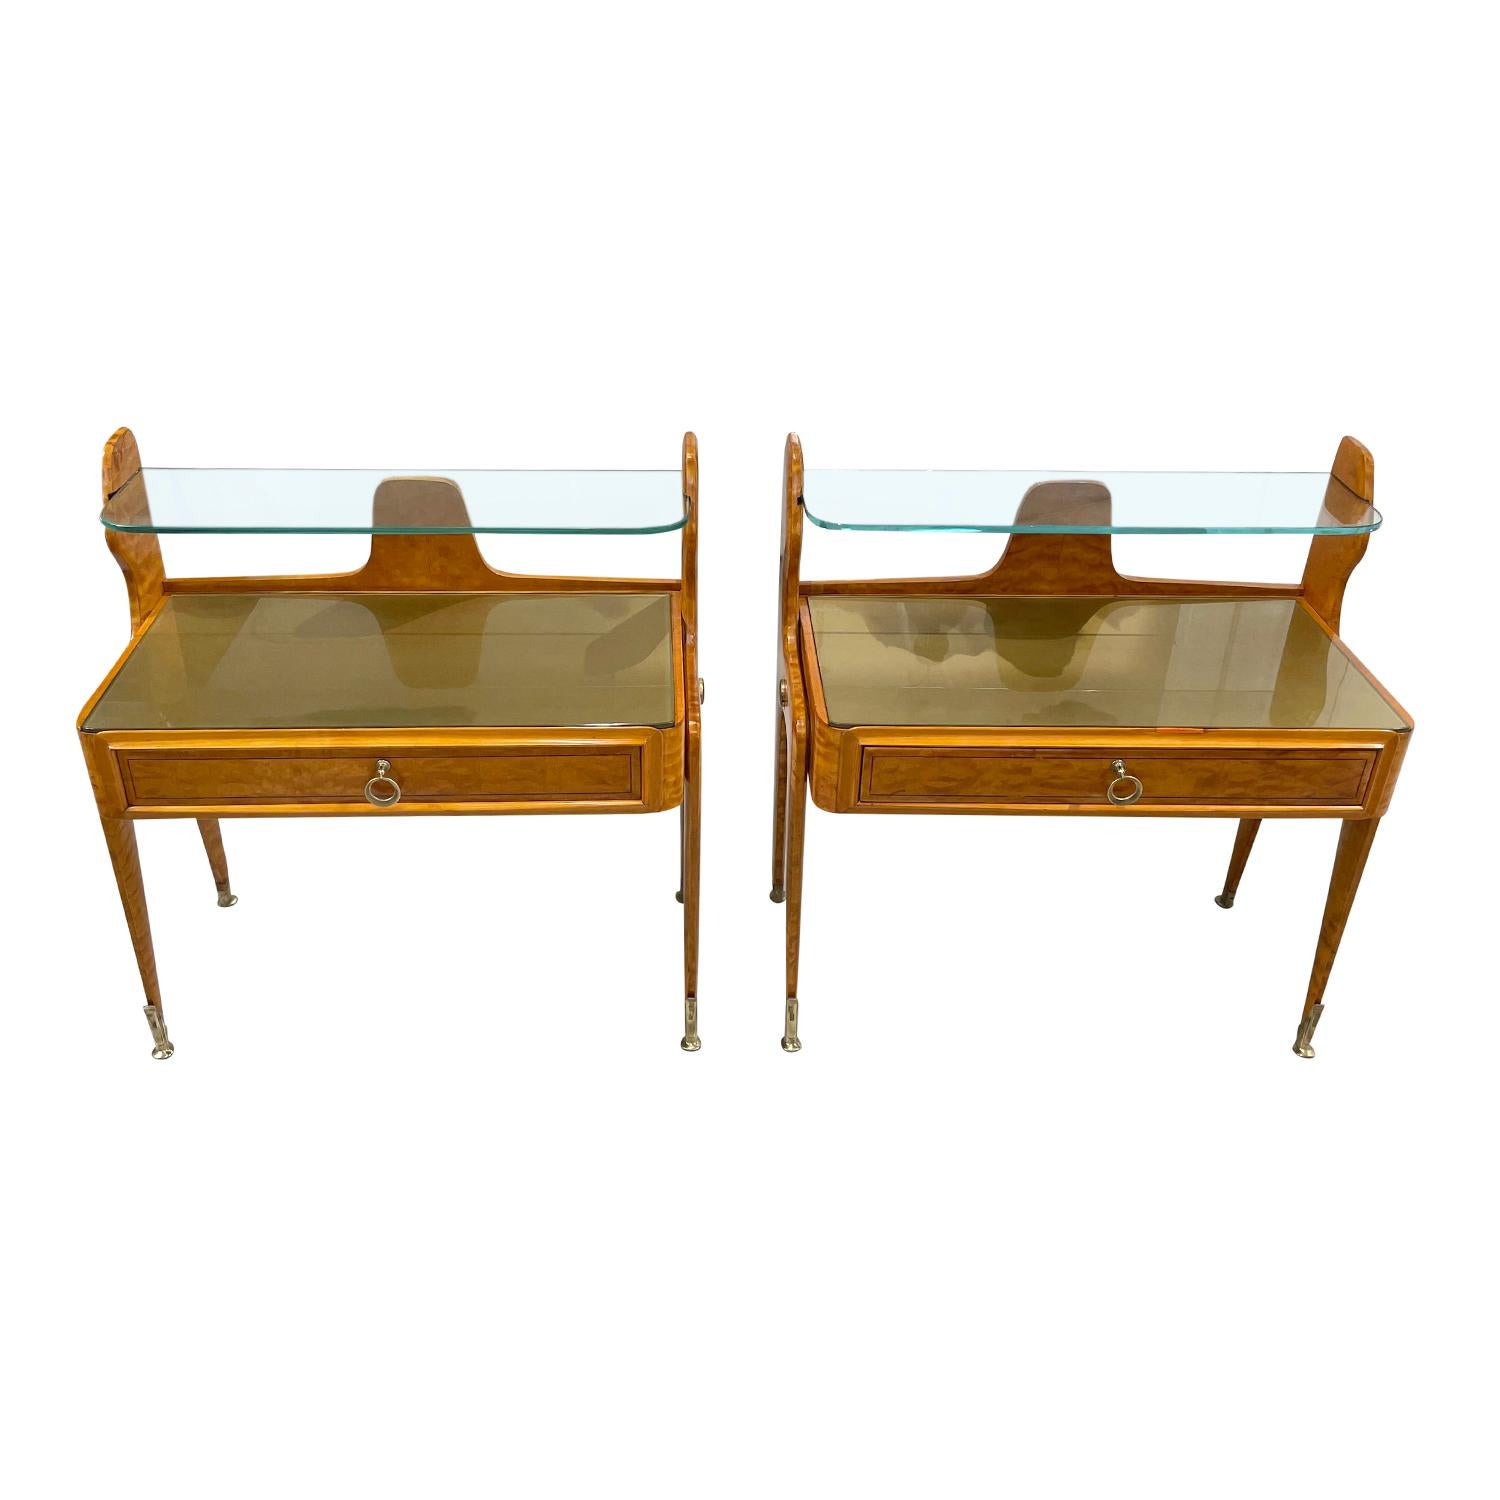 Hand-Carved 20th Century Italian Mid-Century Pair of Maplewood Nightstands by Paolo Buffa